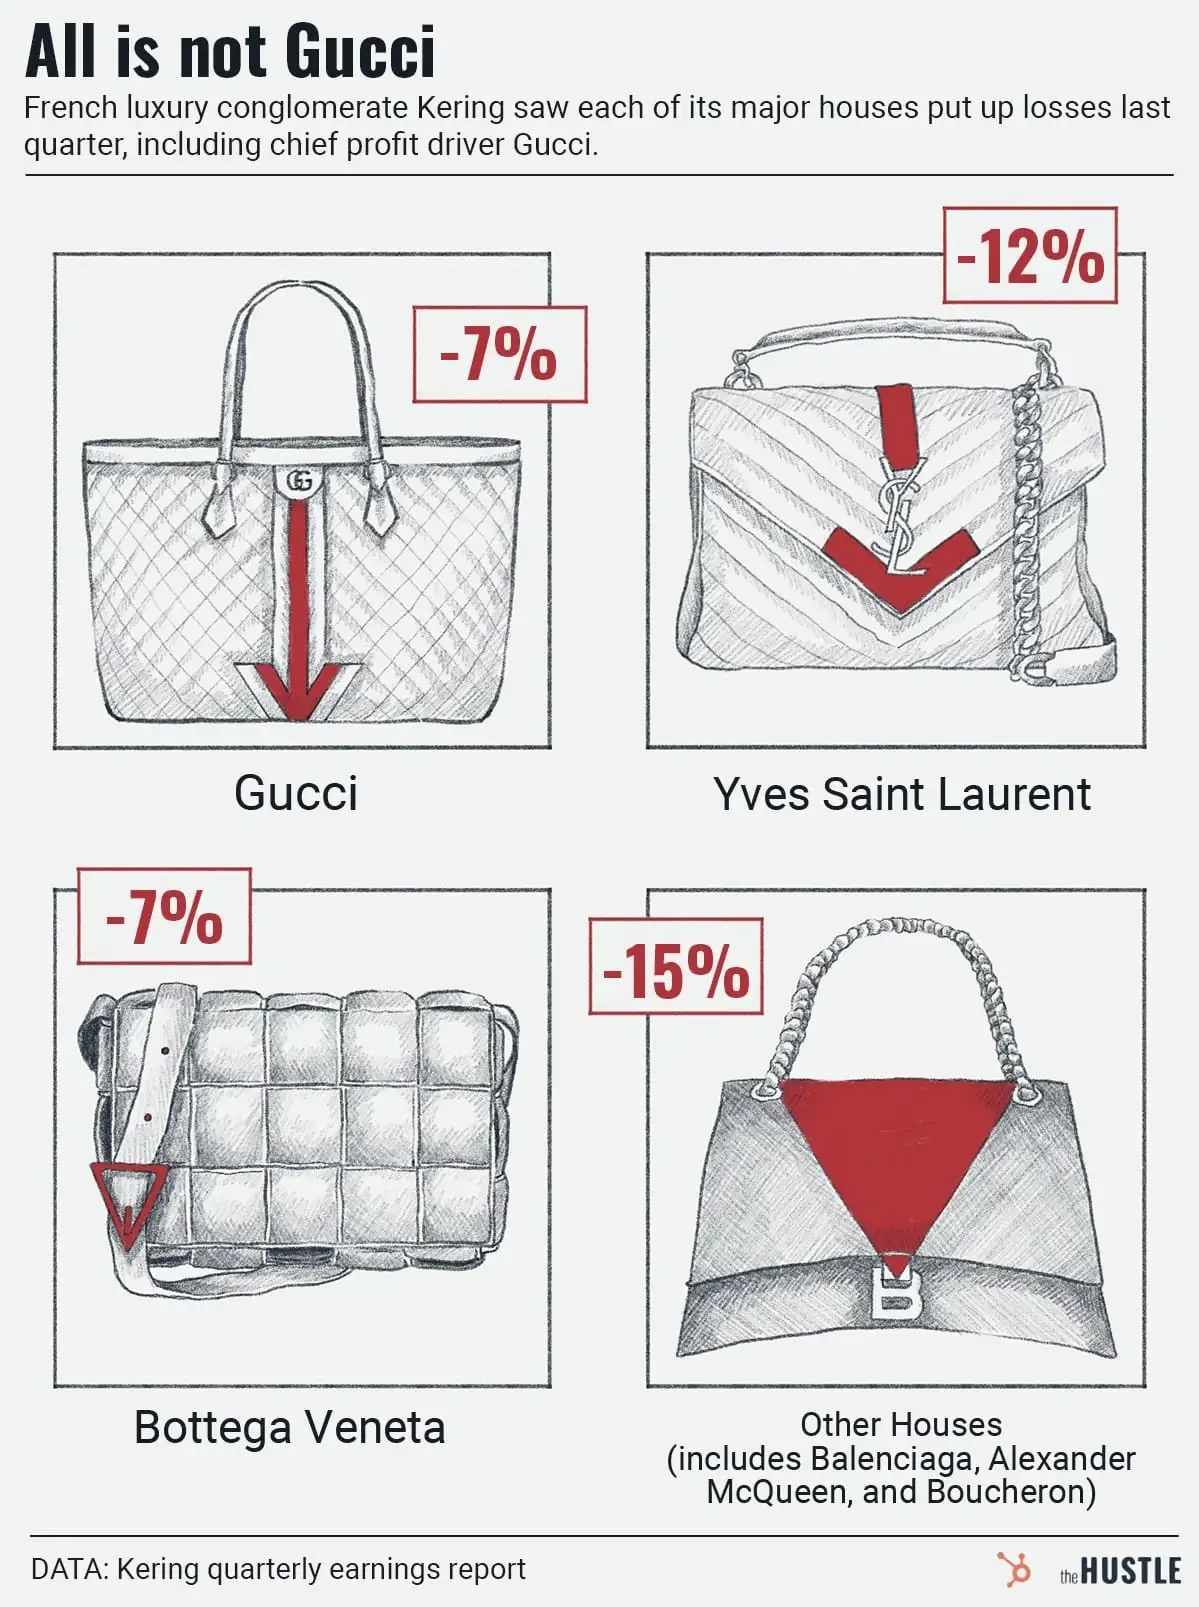 Luxury brands seek a miracle inside their (ostentatious, overpriced) bag of tricks